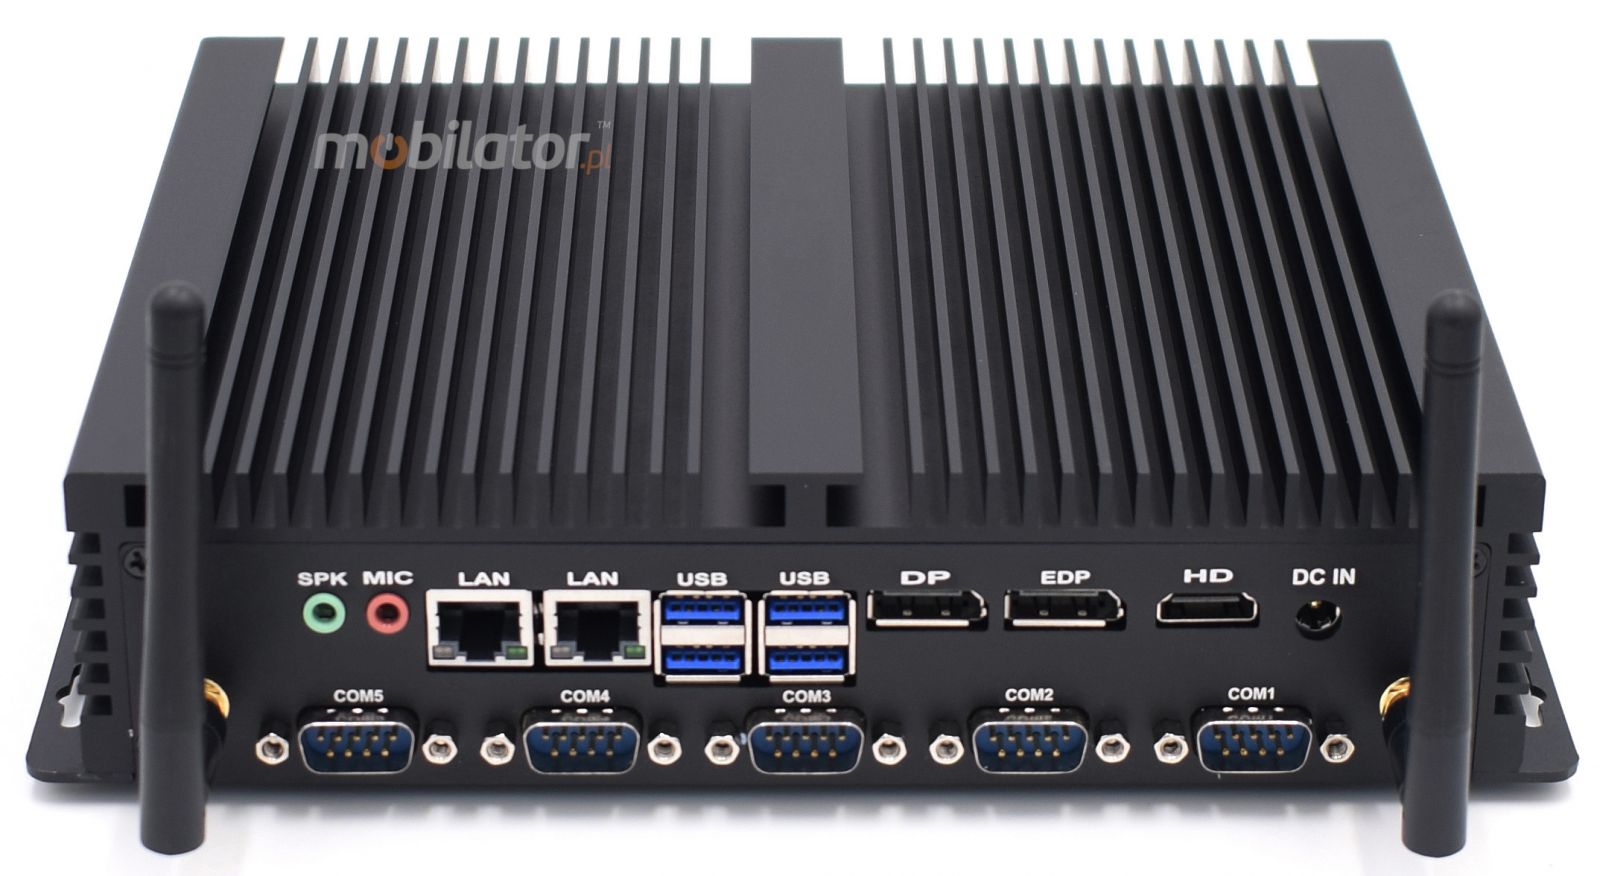  HyBOX H4 Intel i5 small reliable fast and efficient mini pc